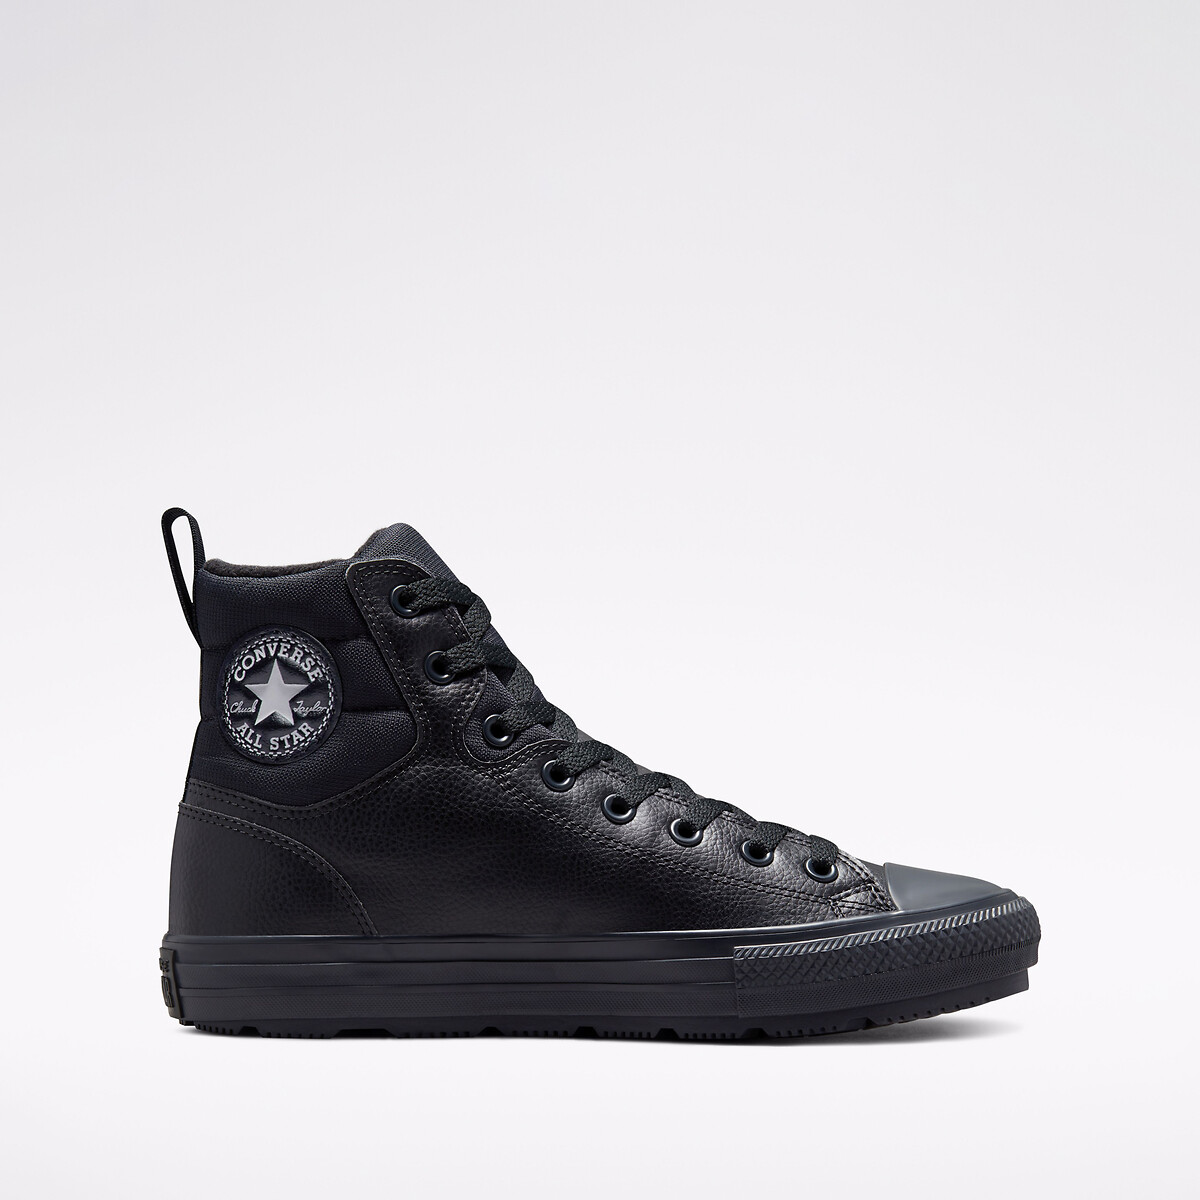 Image of Chuck Taylor All Star Berkshire Boot High Top Trainers